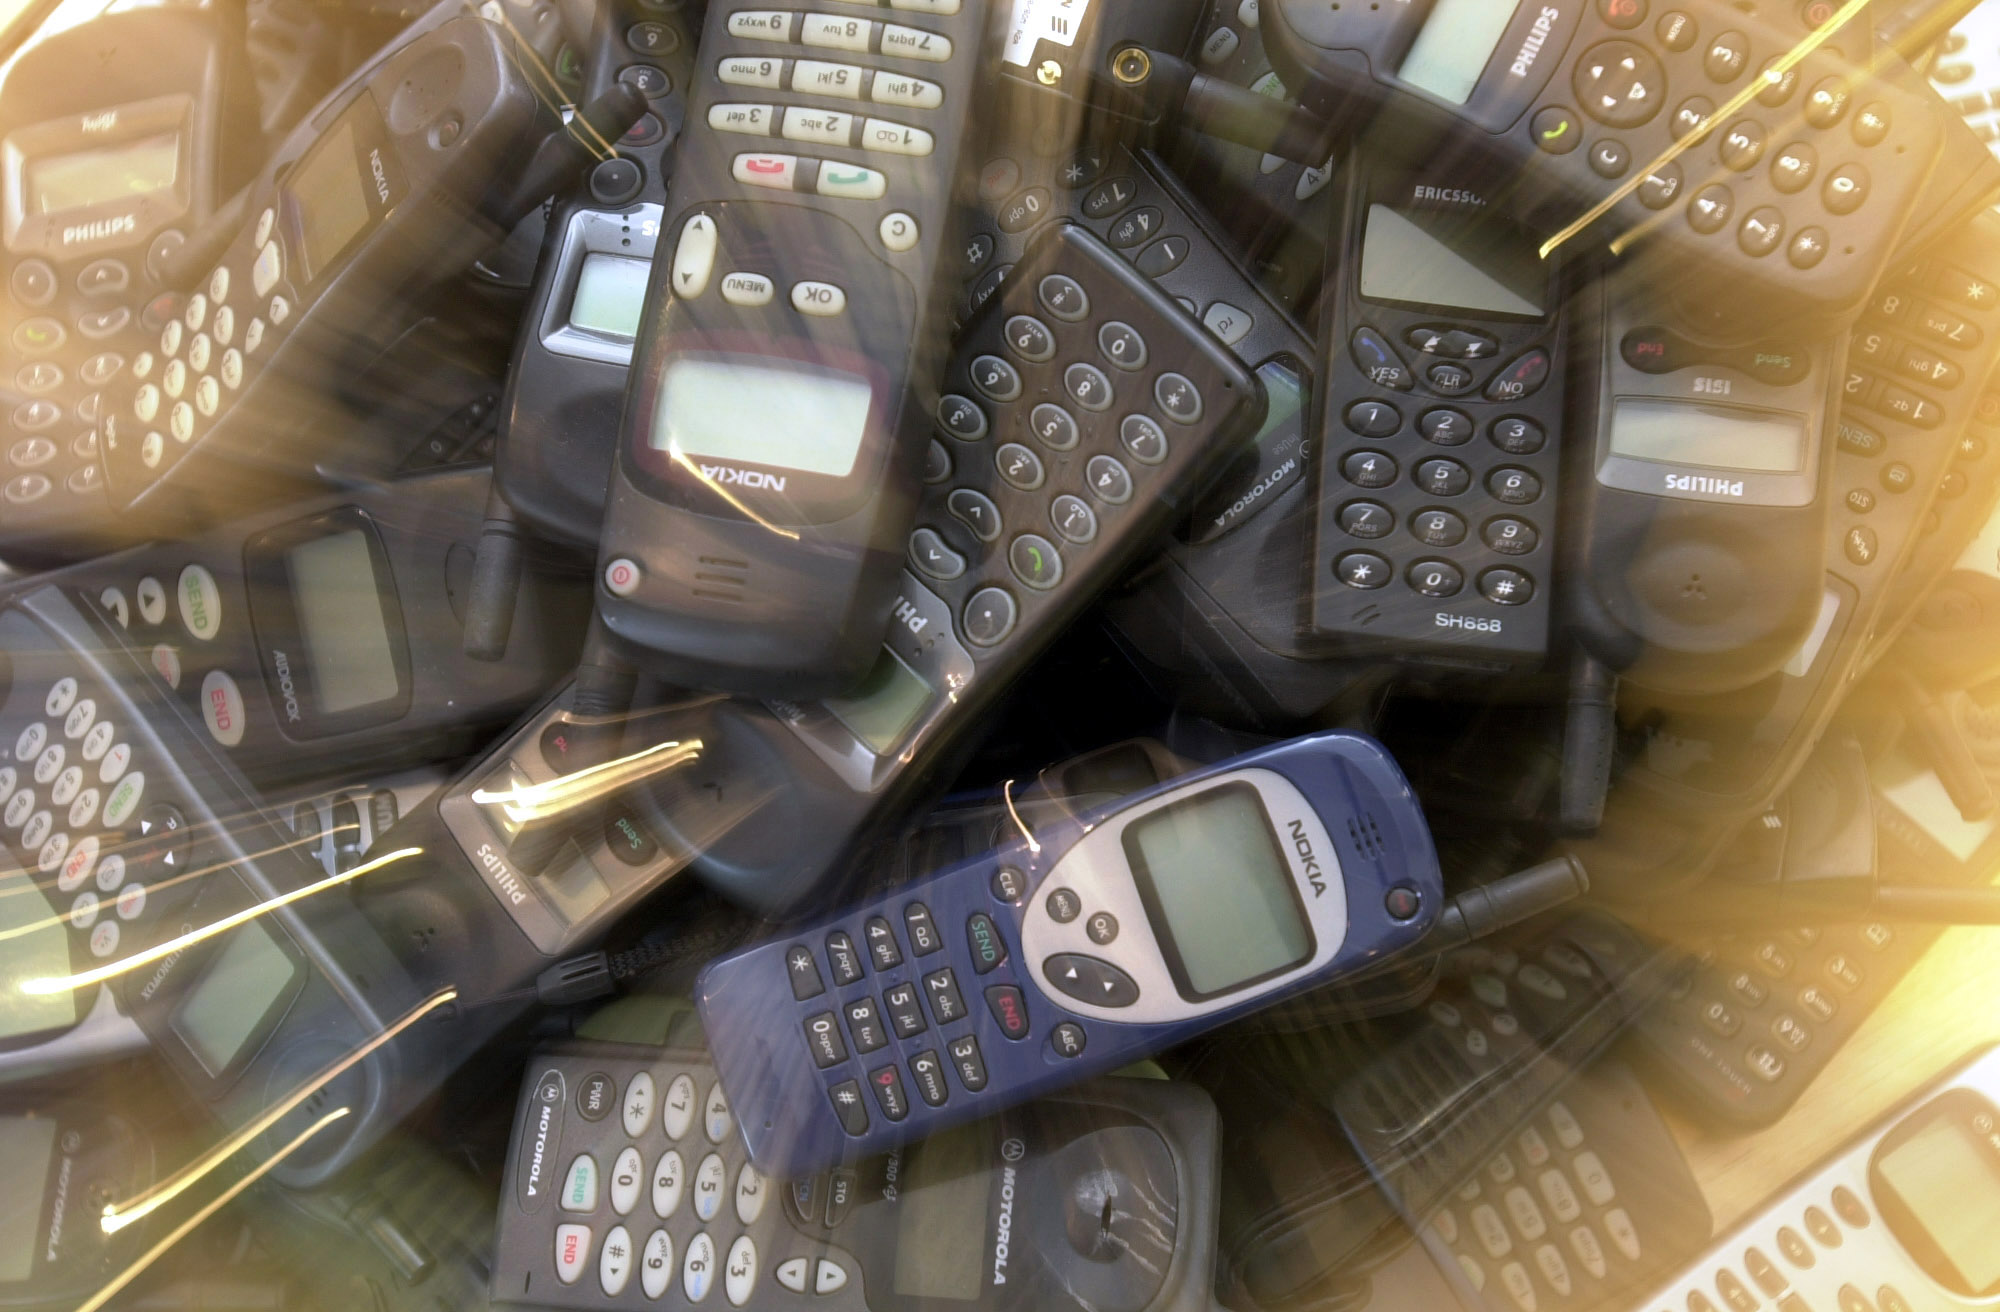 WELLINGTON, NEW ZEALAND - JULY 03:  Lost Cellphones bound for recycling in Singapore.  (Photo by Ross Land/Getty Images)